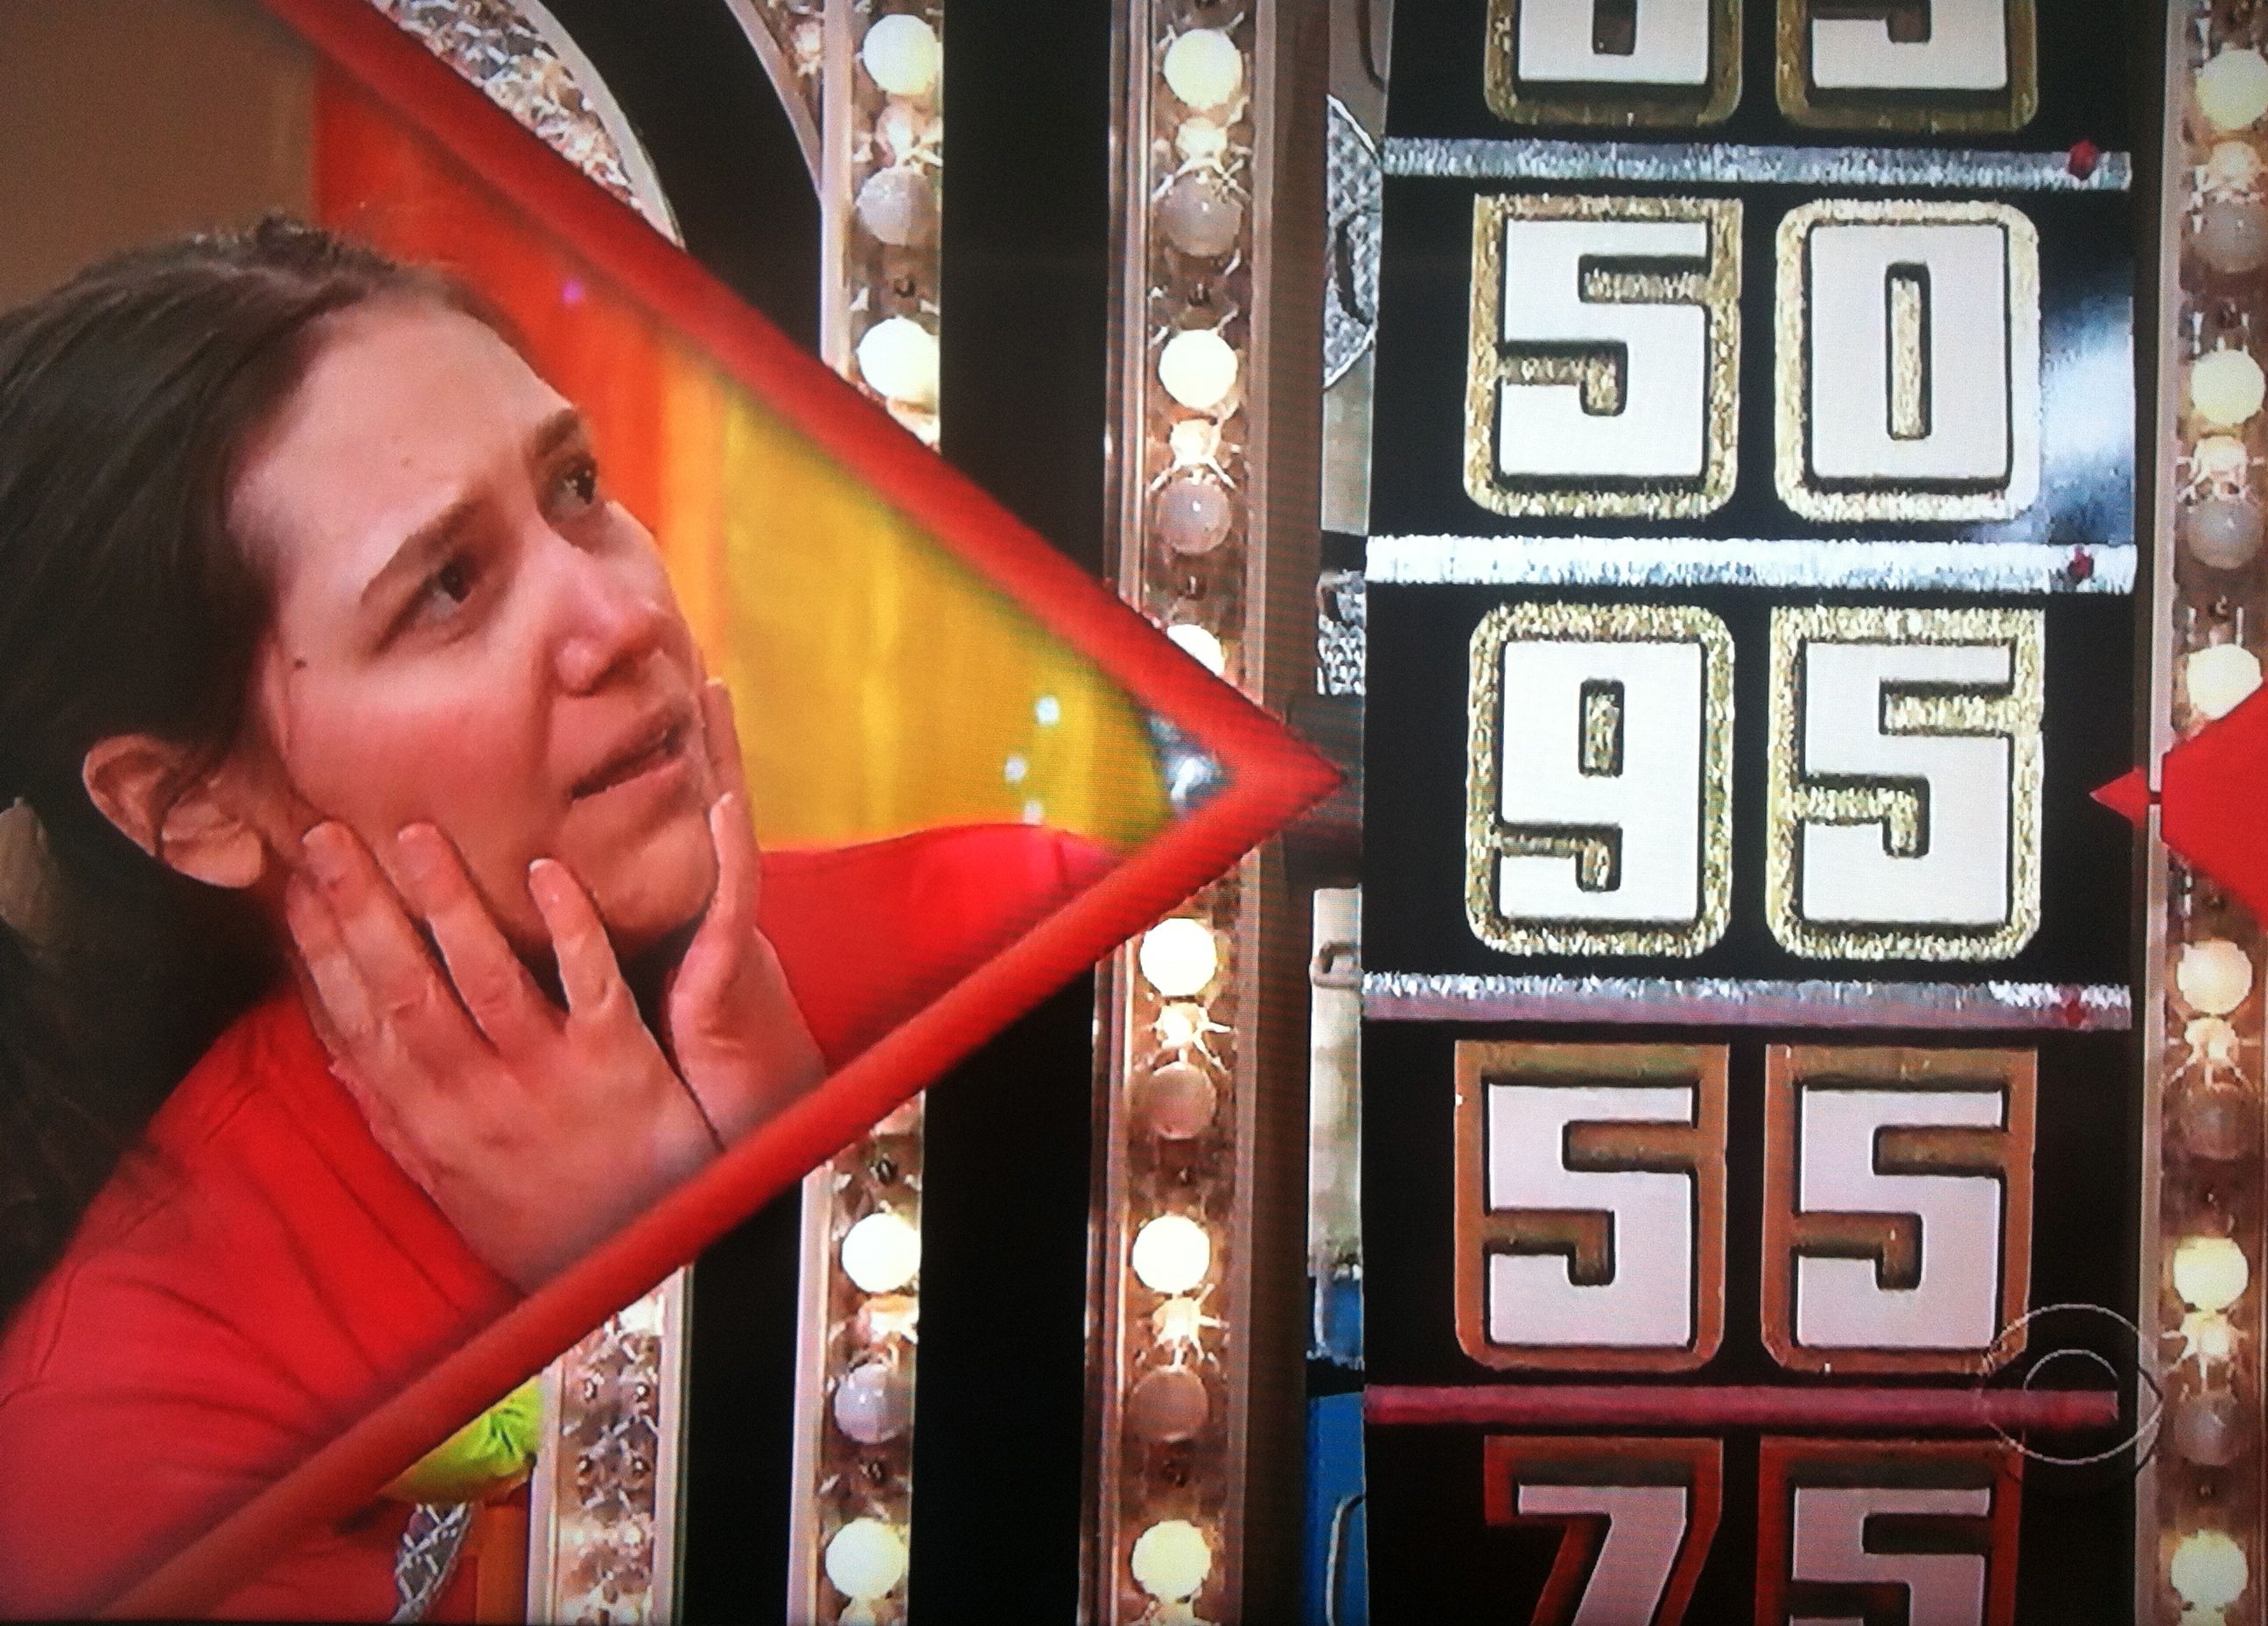 Aurora stressed as she's about to go over a dollar on The Price is Right wheel